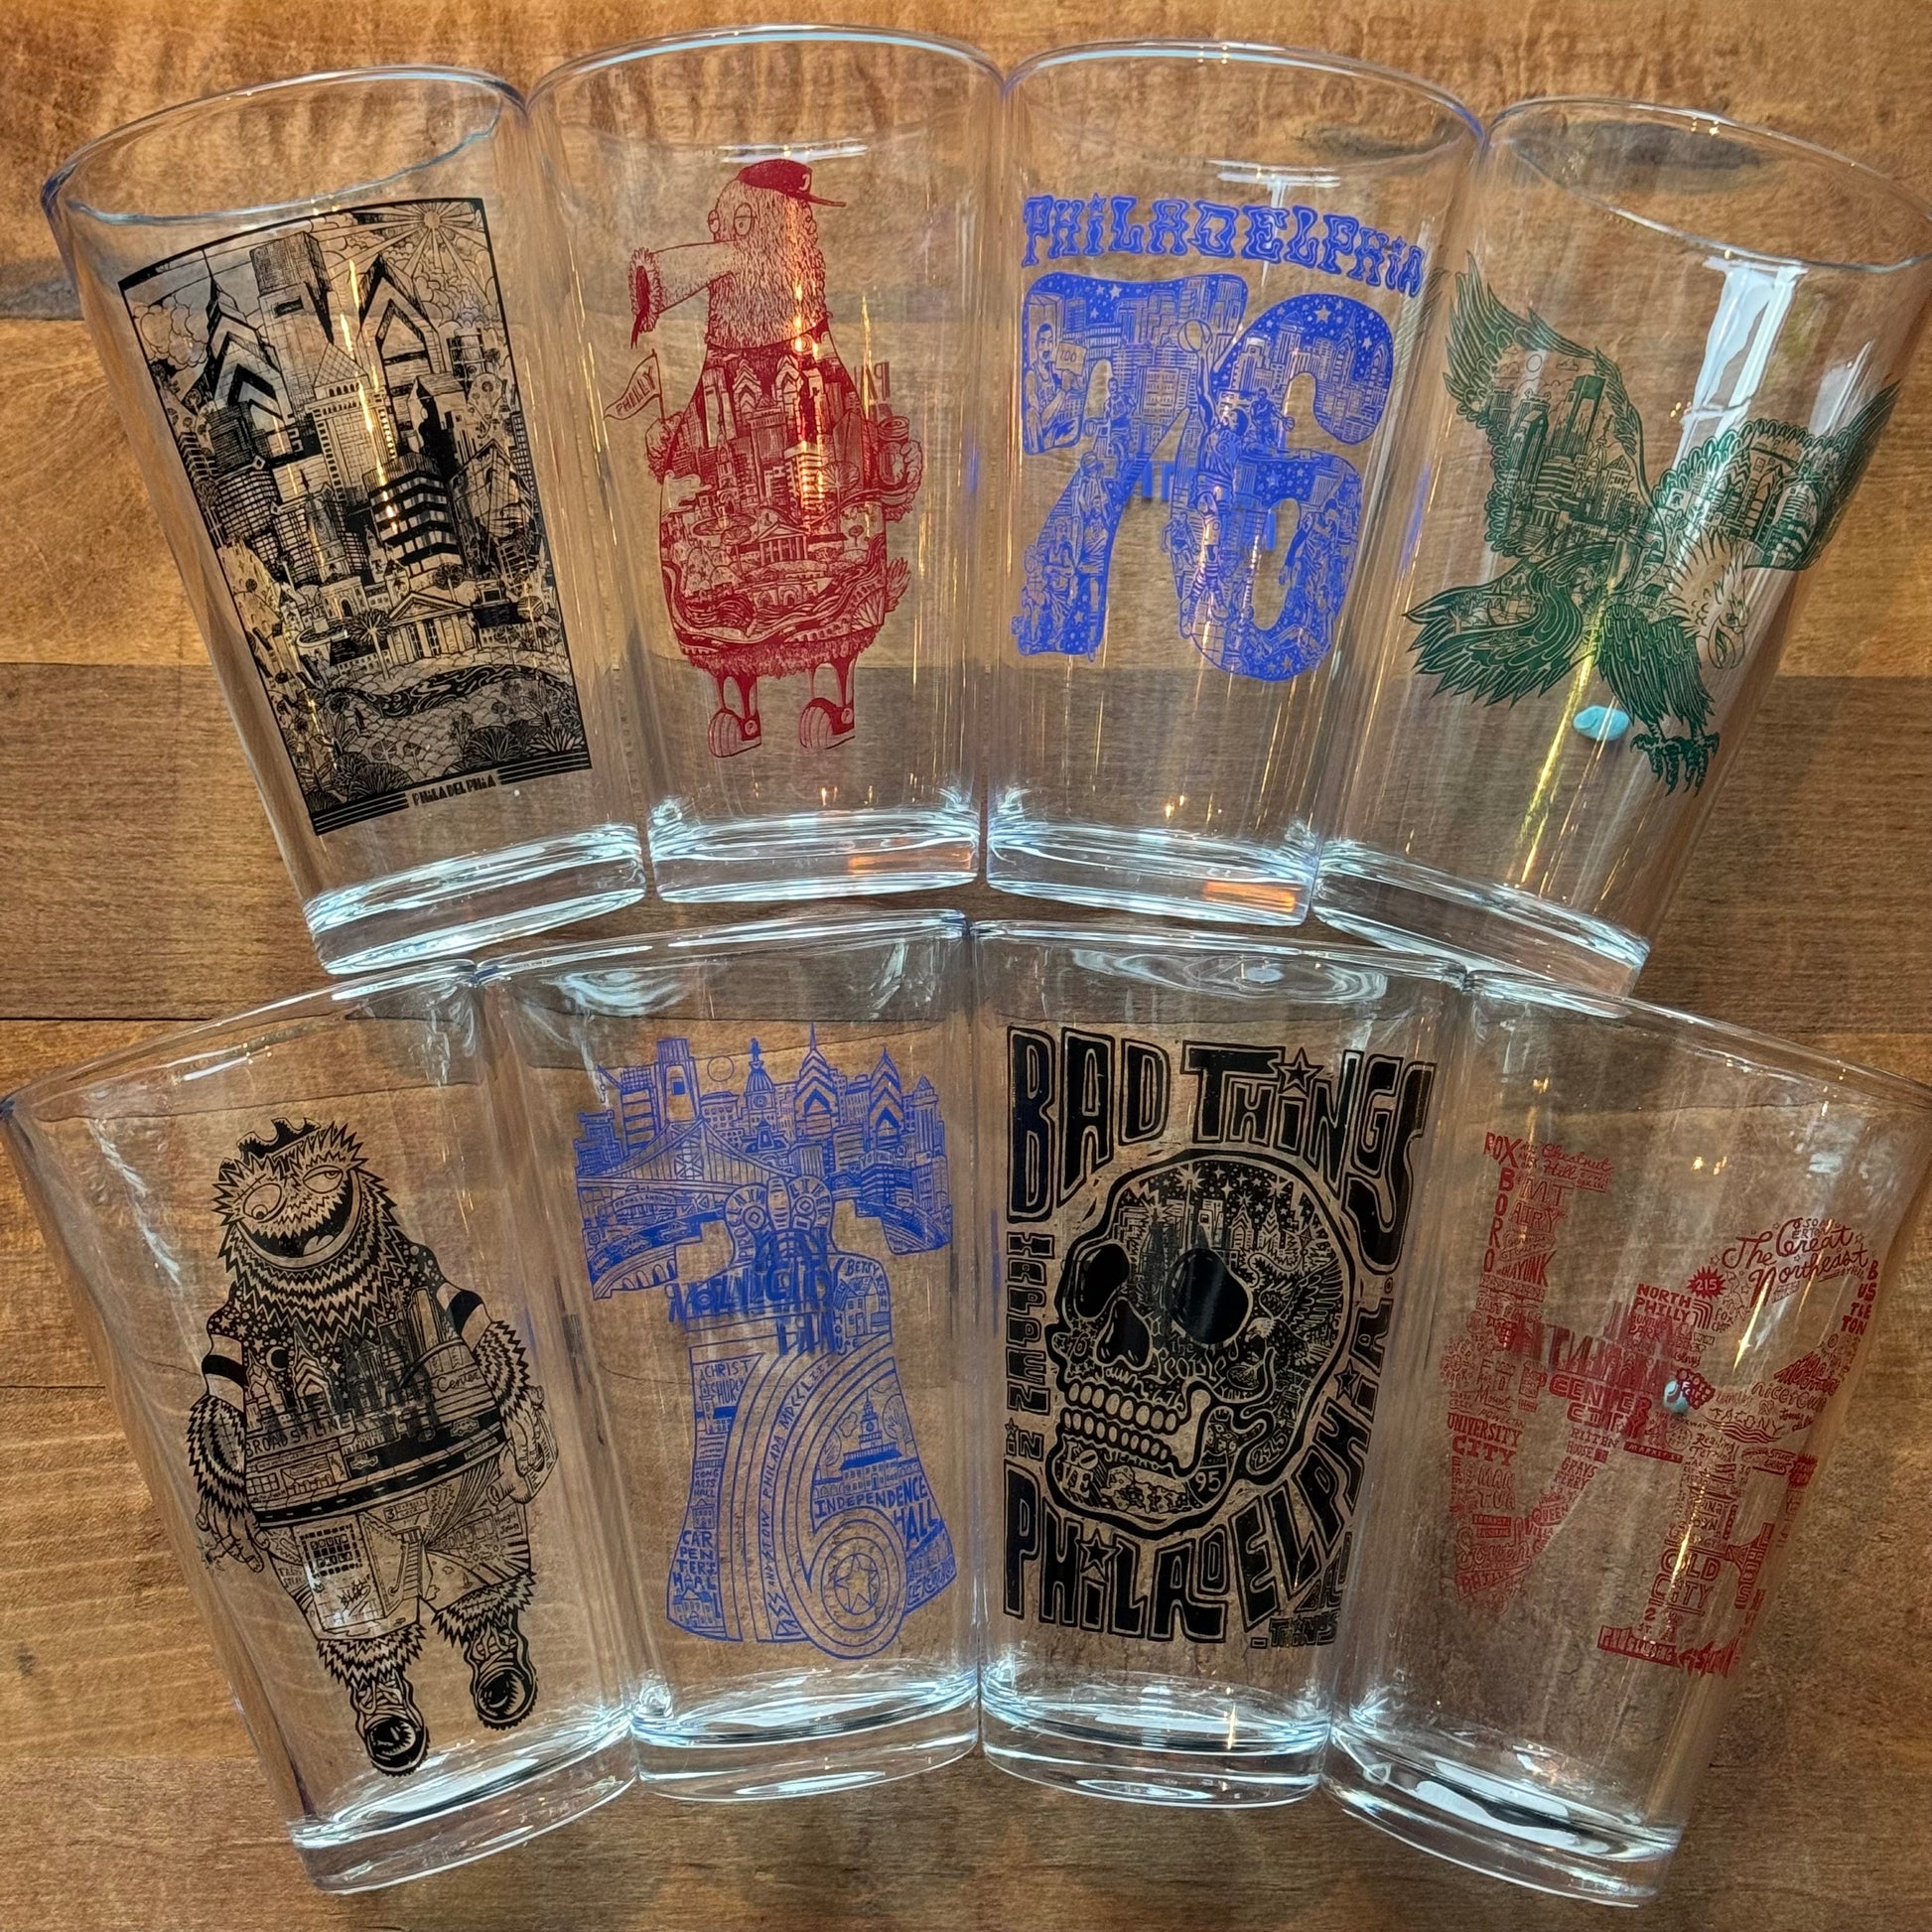 A collection of eight Paul Carpenter Philly Pint Glasses each with a different design related to Philadelphia's landmarks and skyline, displayed on a wooden surface.